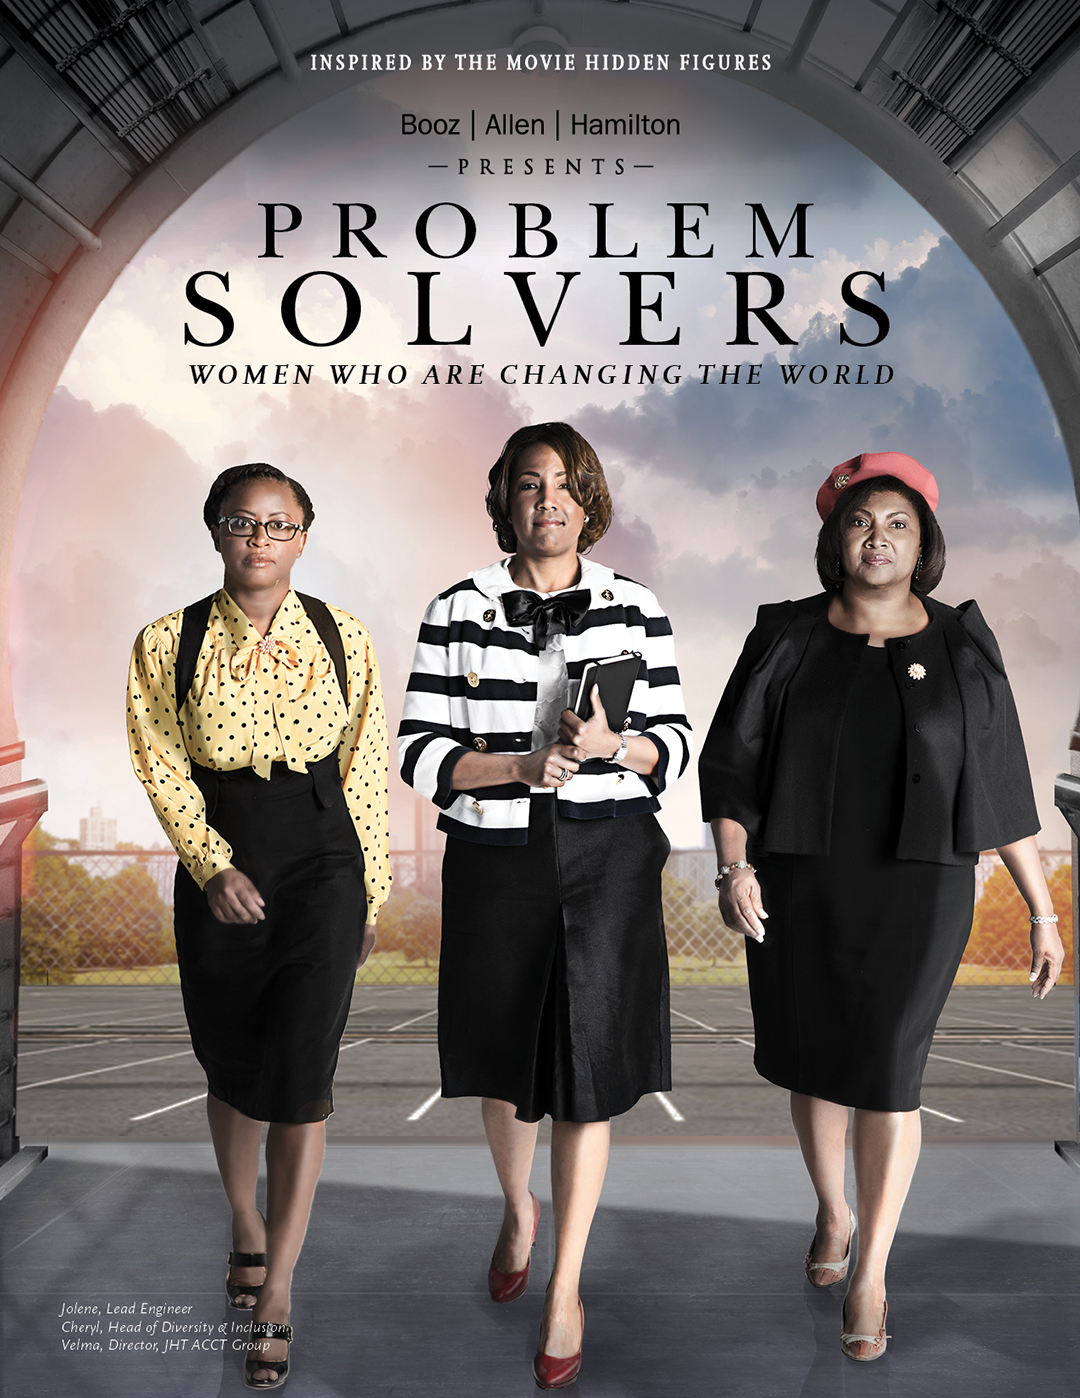 Booz Allen Hamilton poster for event titled "Problem Solvers" that mimics the style of the poster for the film "Hidden Figures"